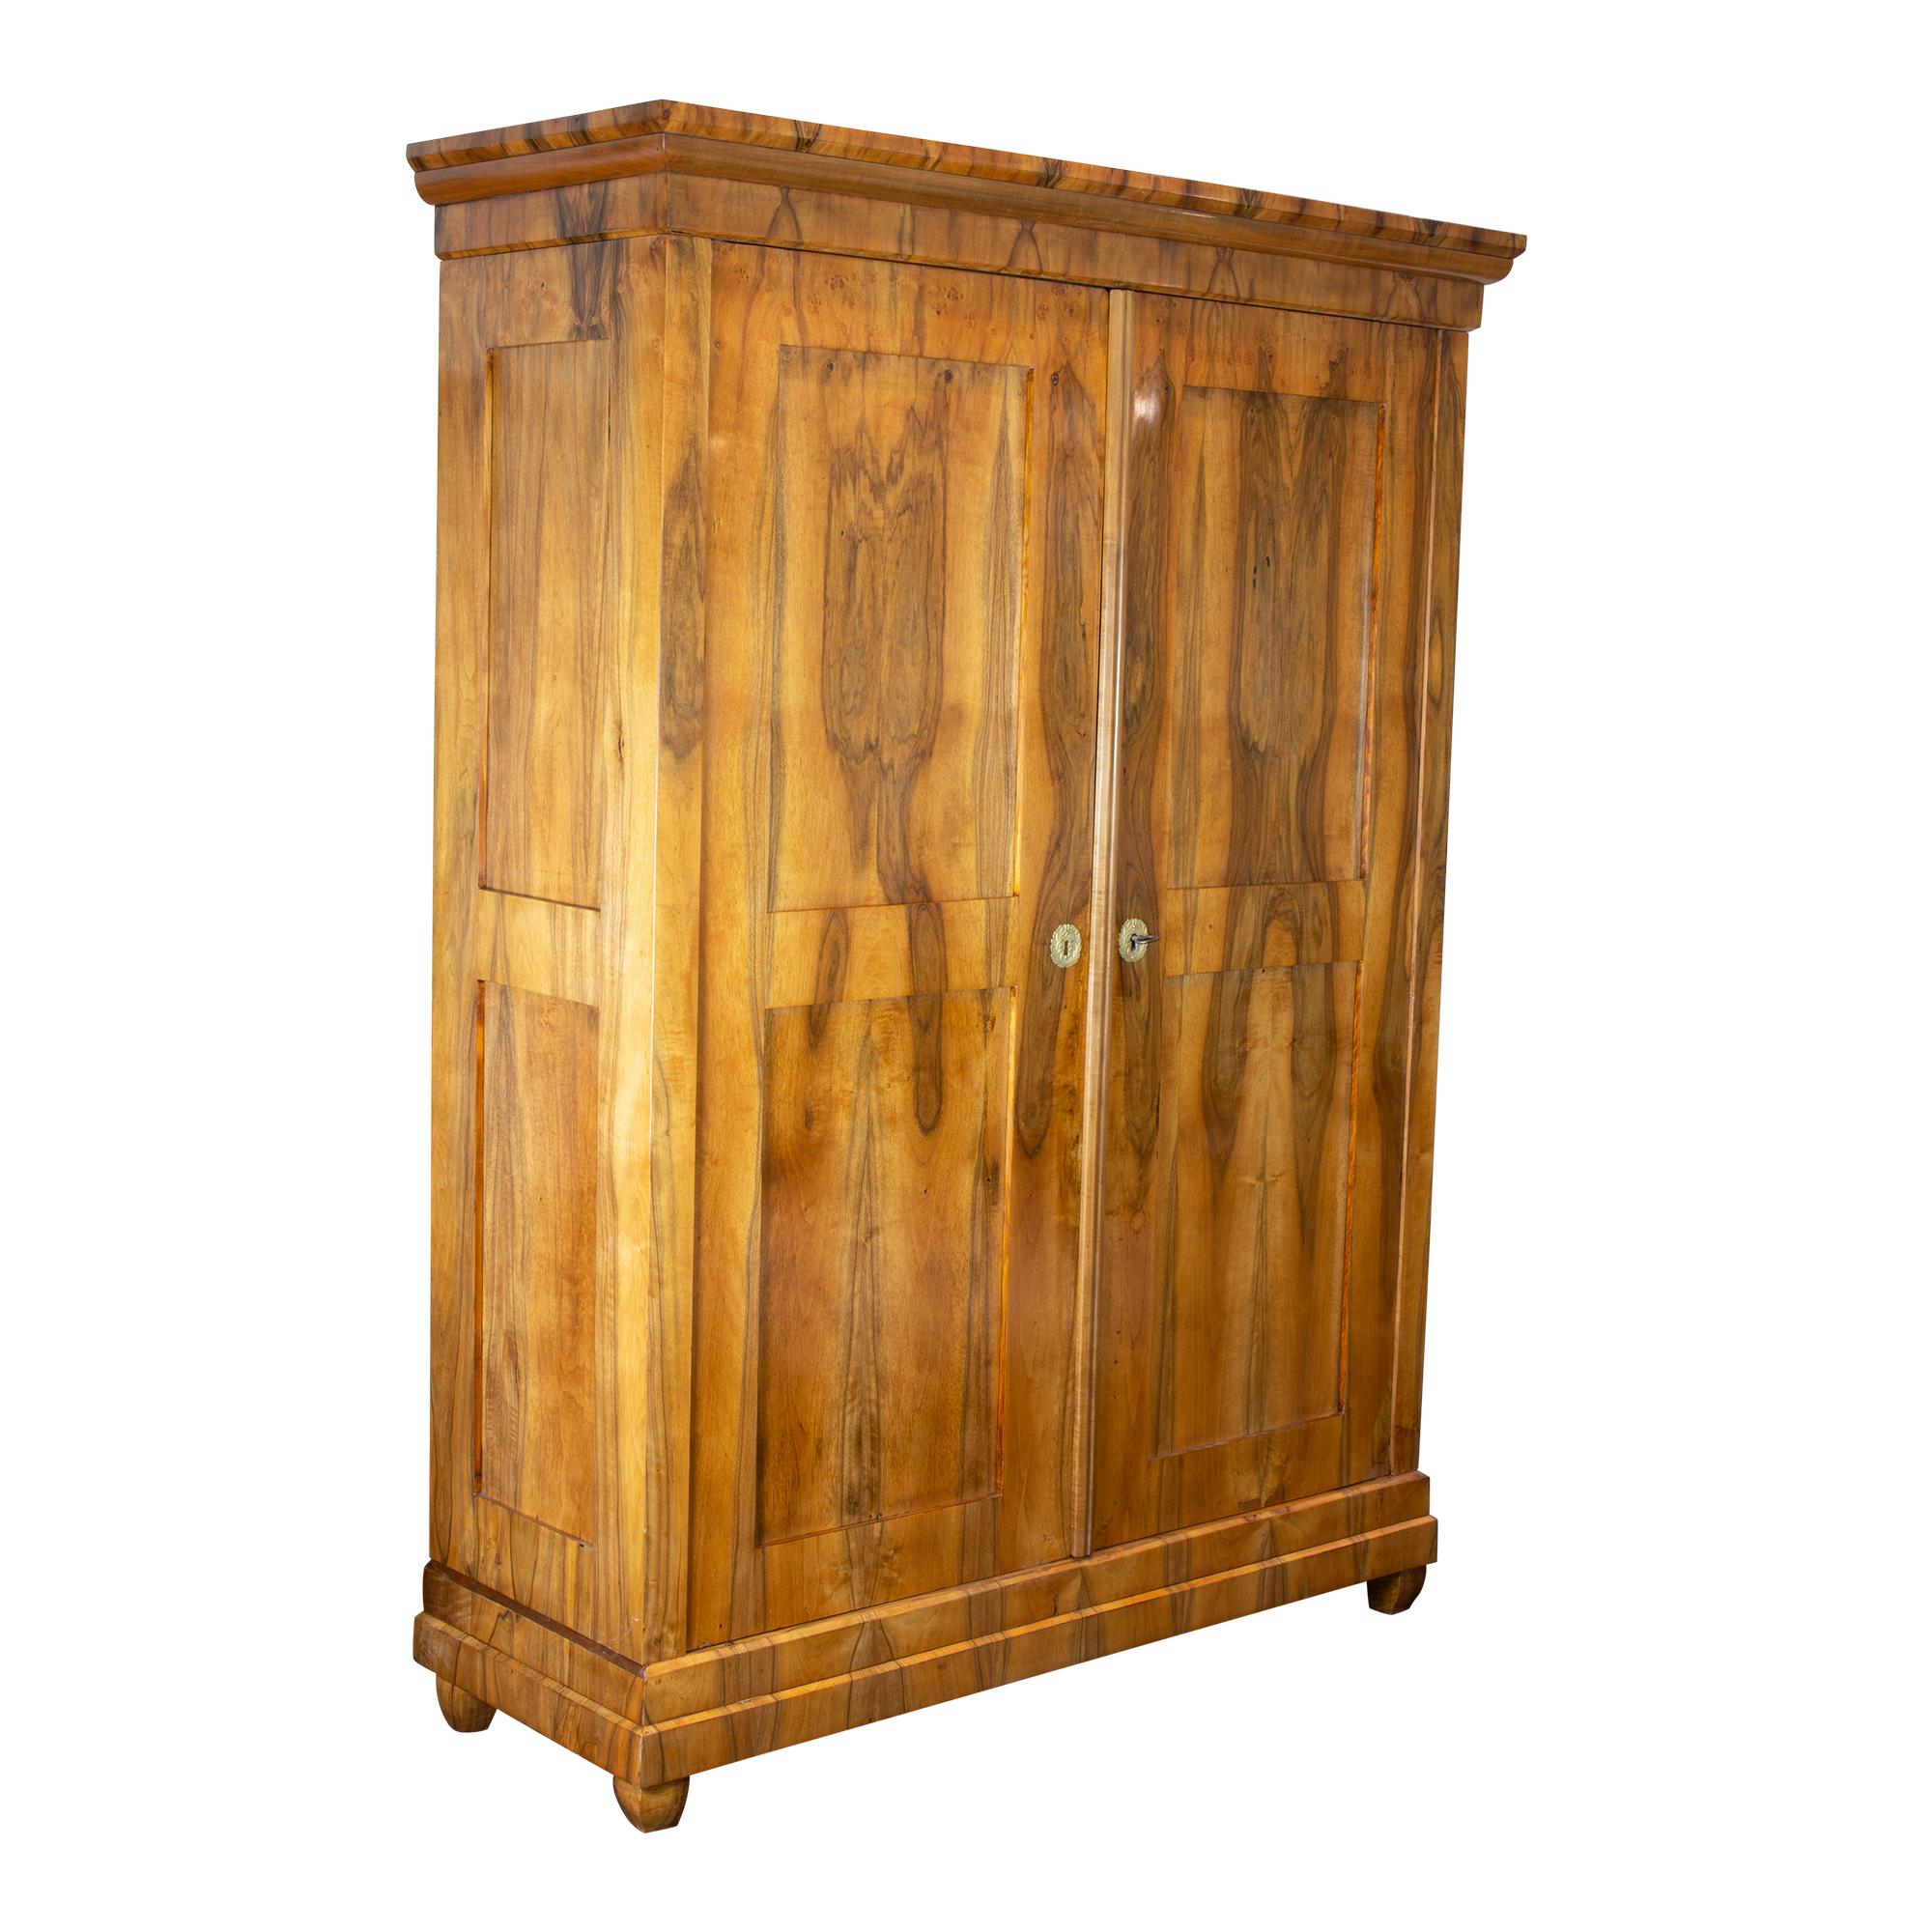 This exquisite Biedermeier wardrobe is a true gem, showcasing the timeless beauty and elegance of a bygone era. Crafted from high-quality walnut veneer on a softwood body, this wardrobe is both durable and stylish. With its sleek and straightforward